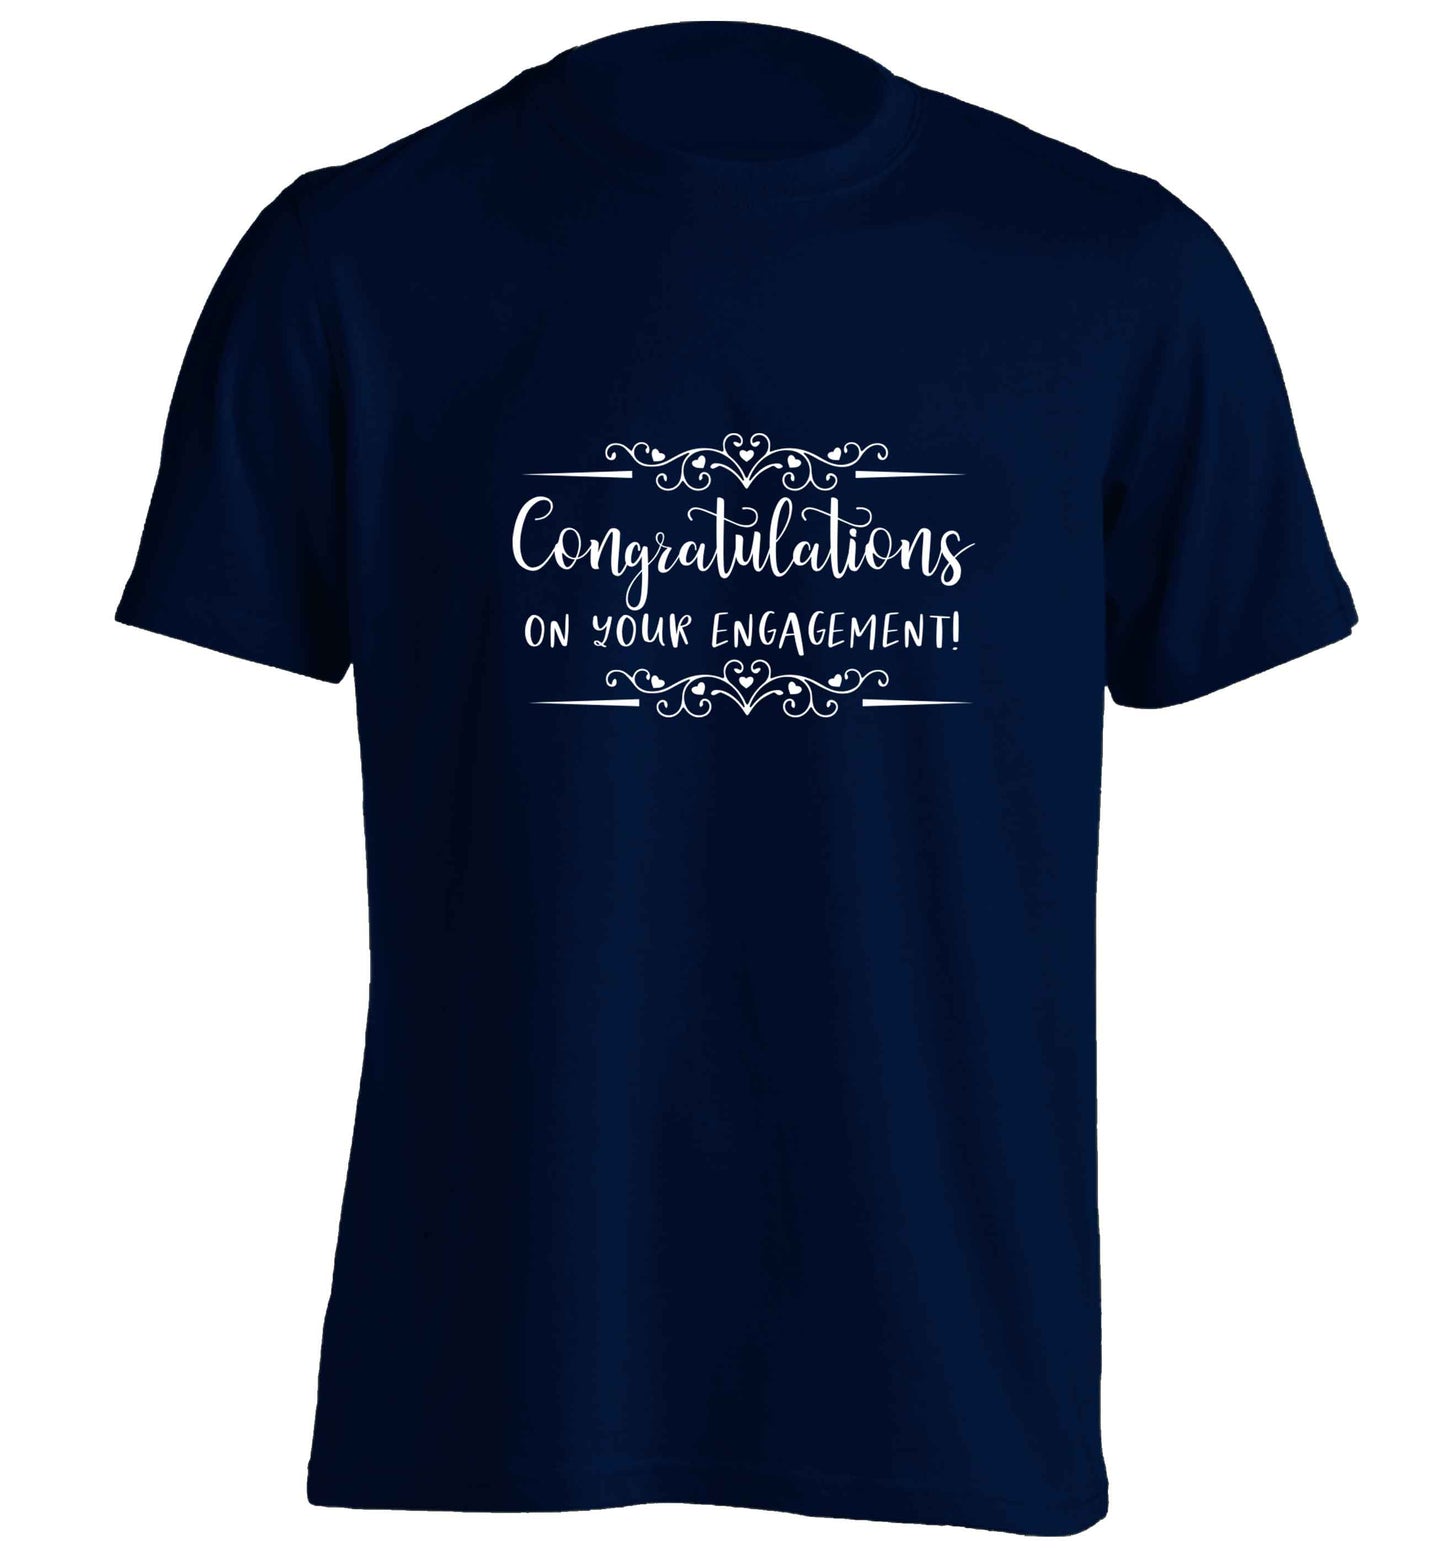 Congratulations on your engagement adults unisex navy Tshirt 2XL